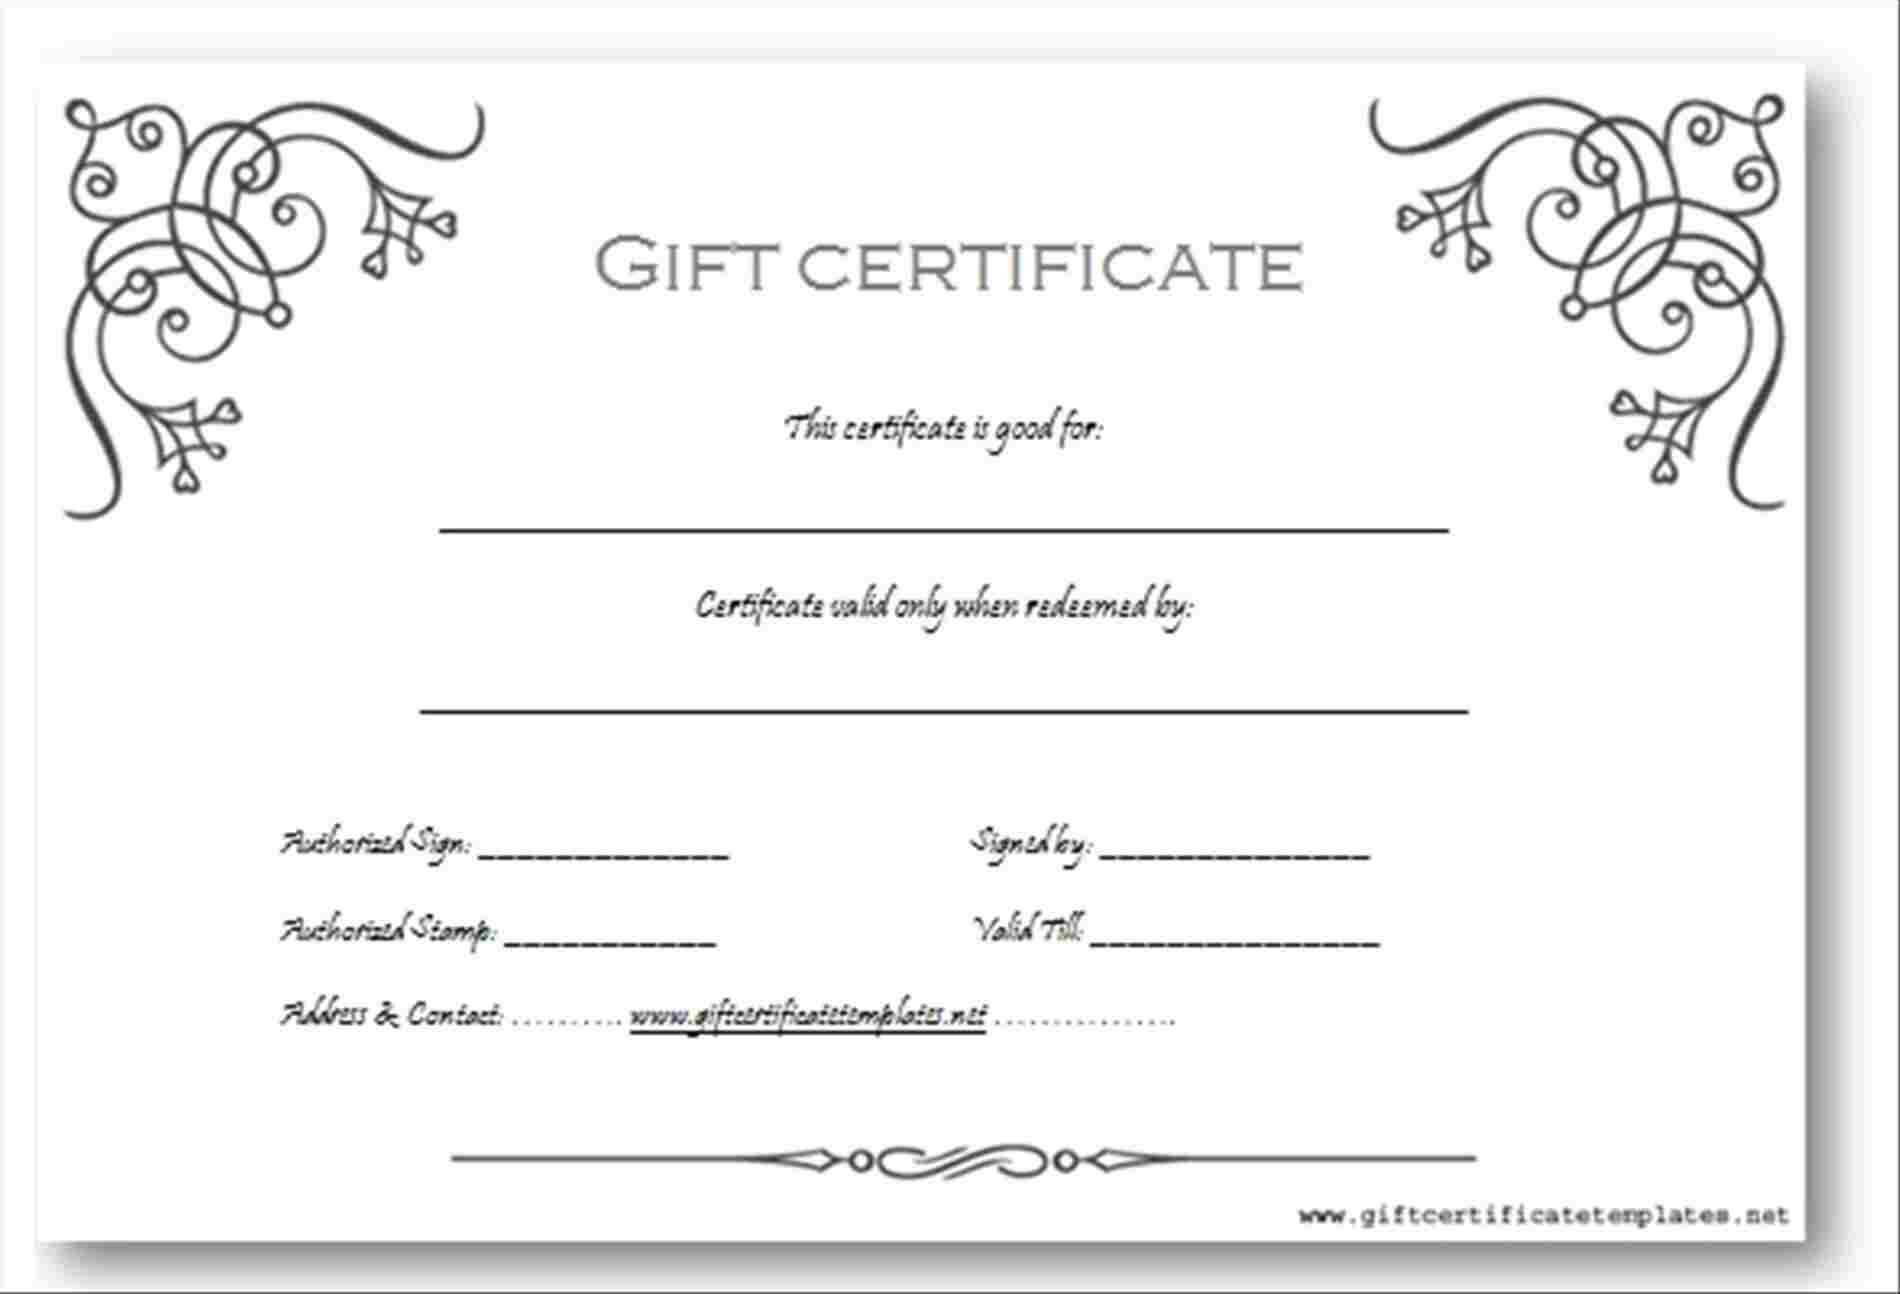 Free Gift Certificate Template Word – Forza.mbiconsultingltd Inside Gift Certificate Log Template